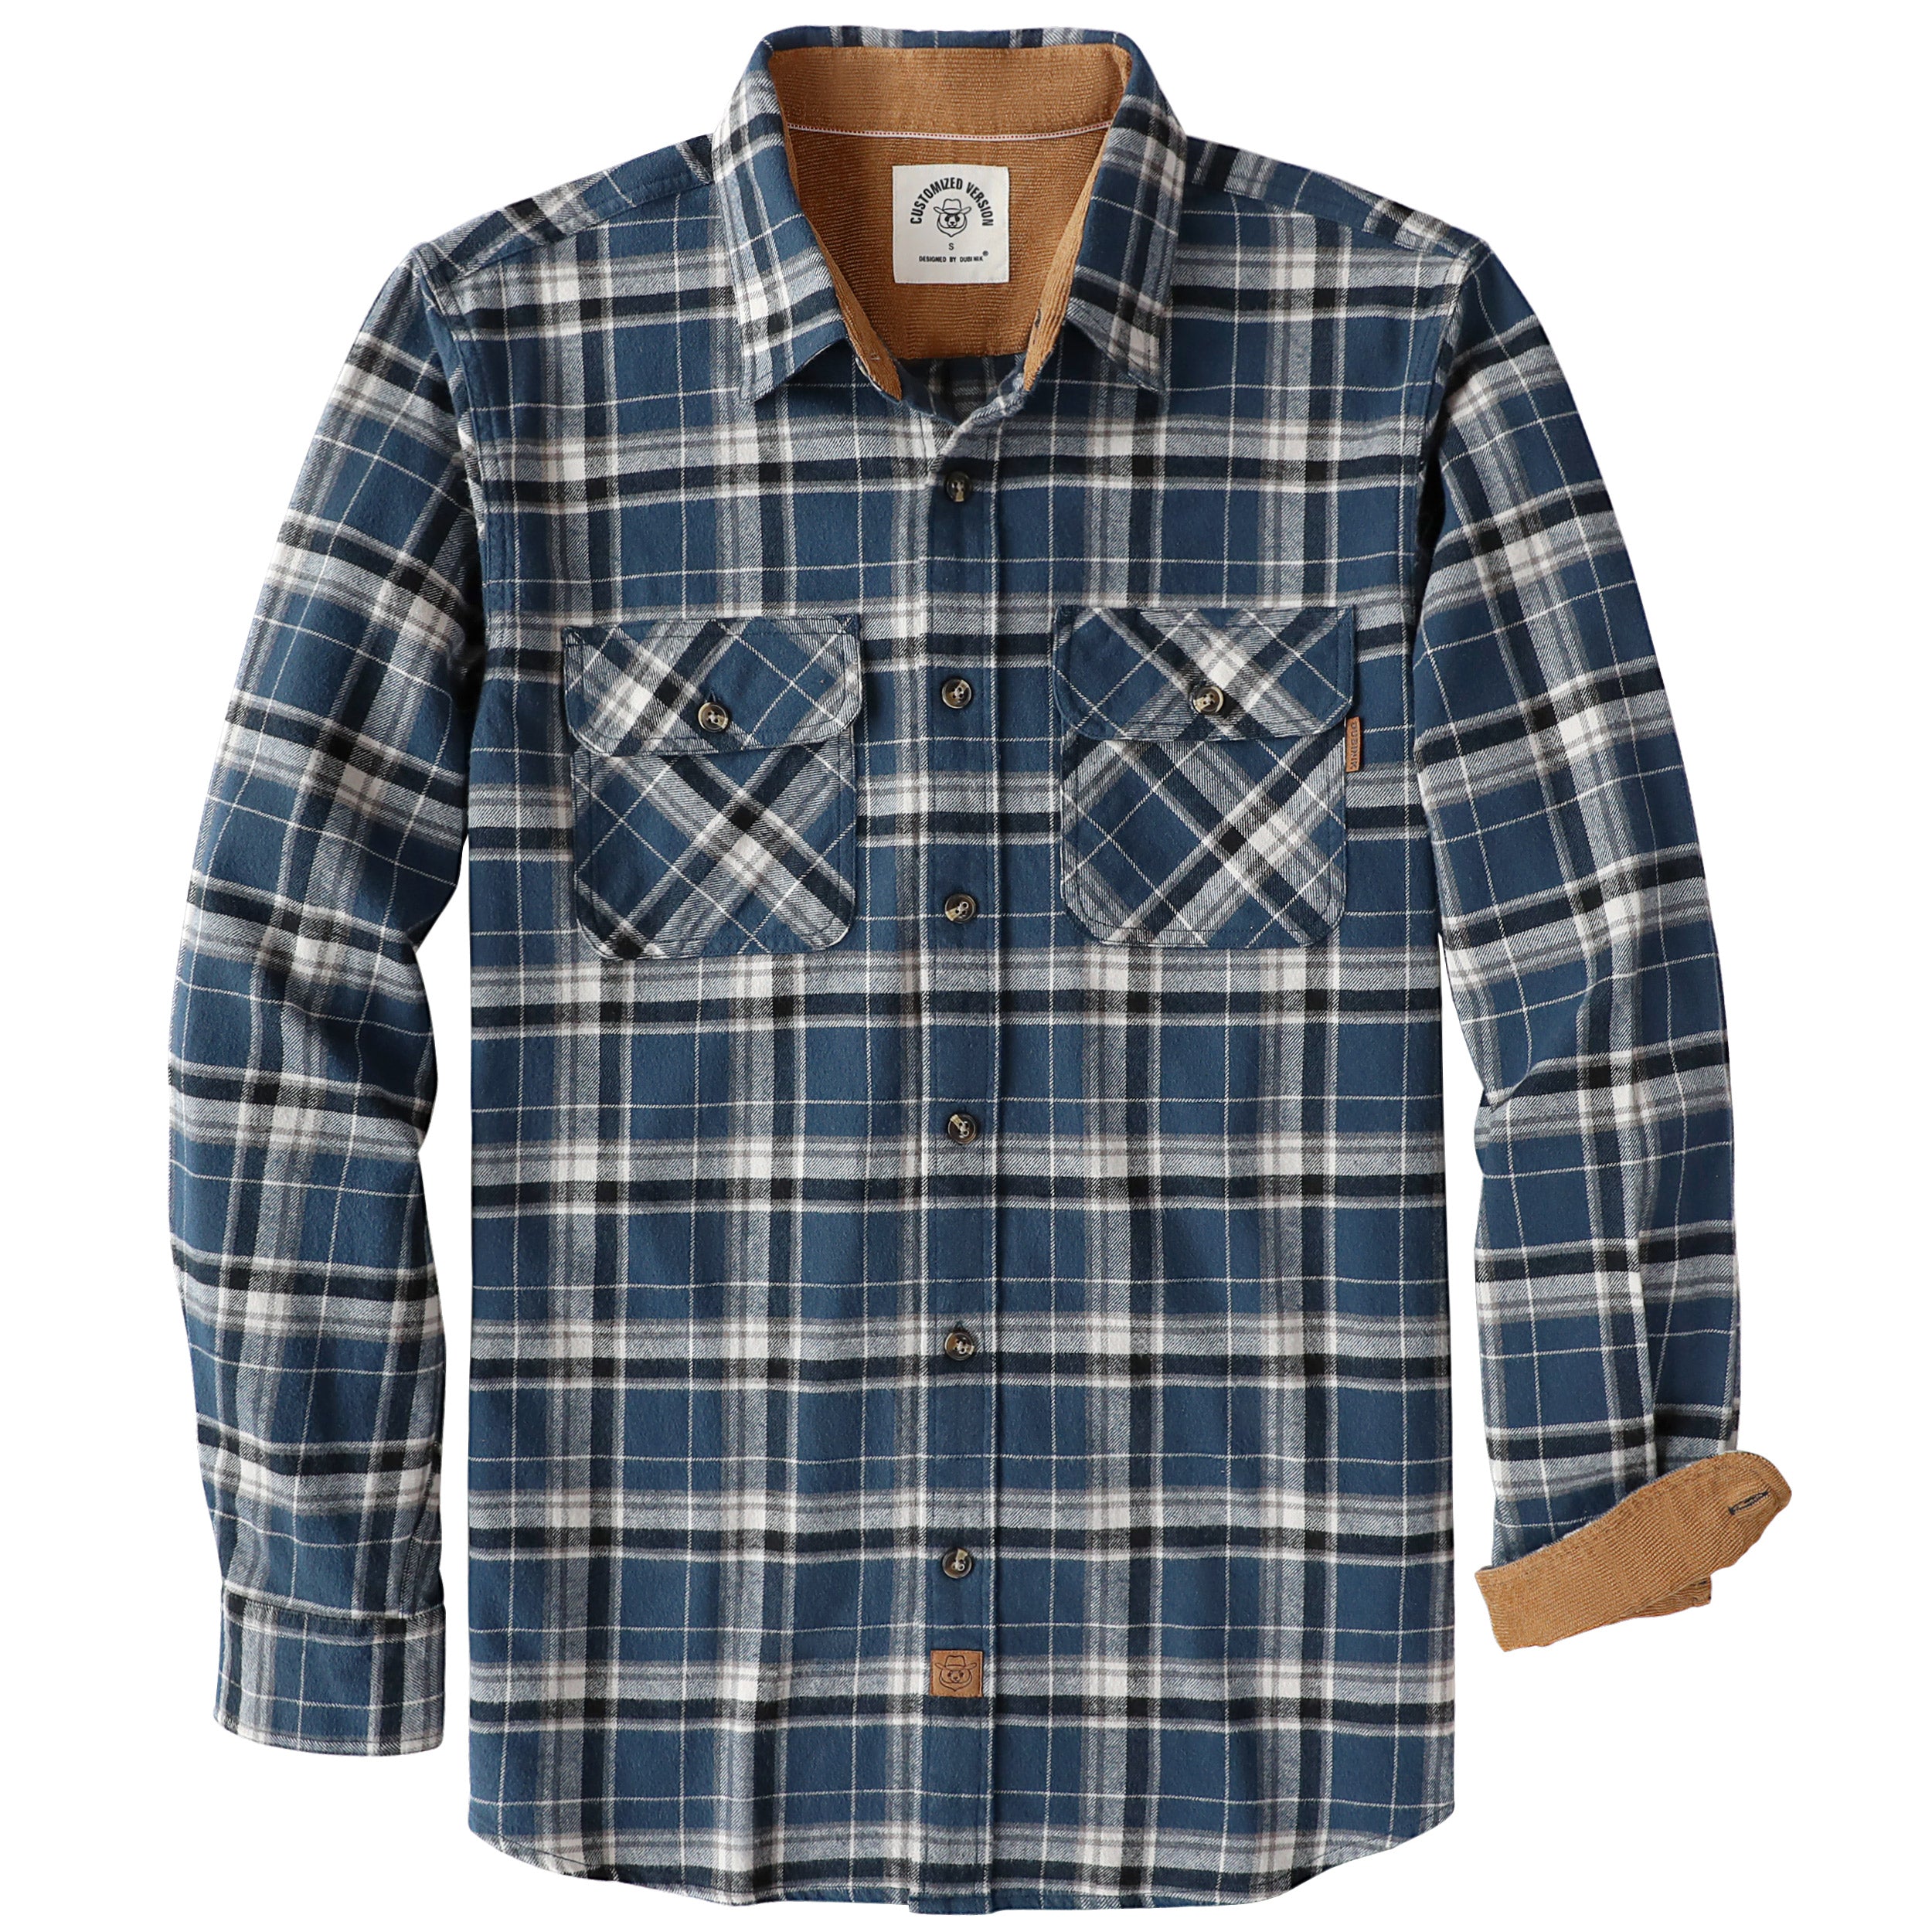 Dubinik® Mens Flannel Shirt Long Sleeve Button Down Plaid All Cotton Soft Brushed Flannel Shirt For Men Utility Casual Shirt #0030021